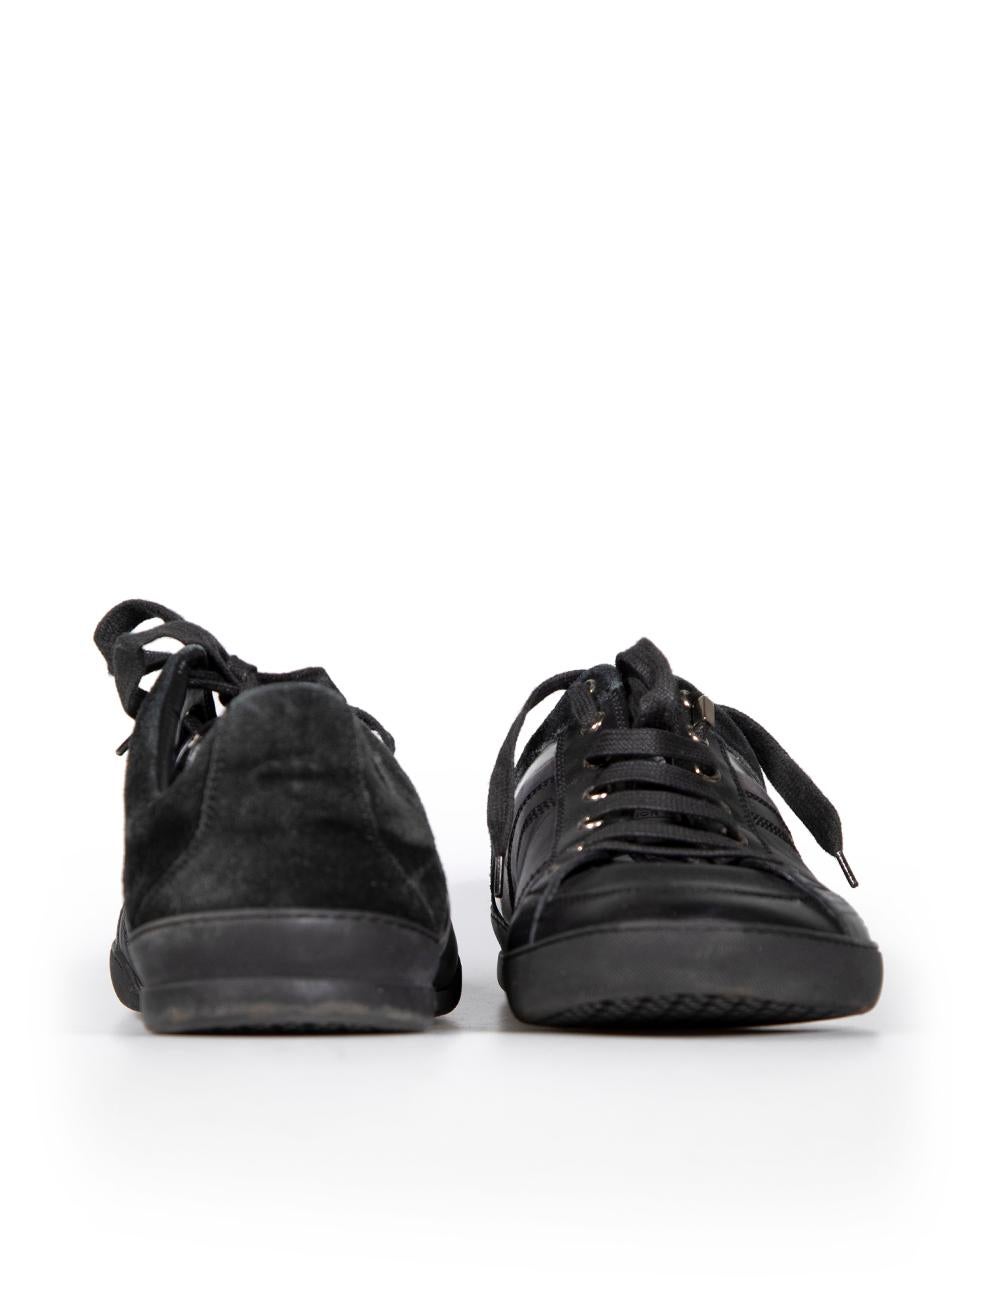 Dior Black Leather B18 Low Top Trainers Size IT 42 In Good Condition For Sale In London, GB